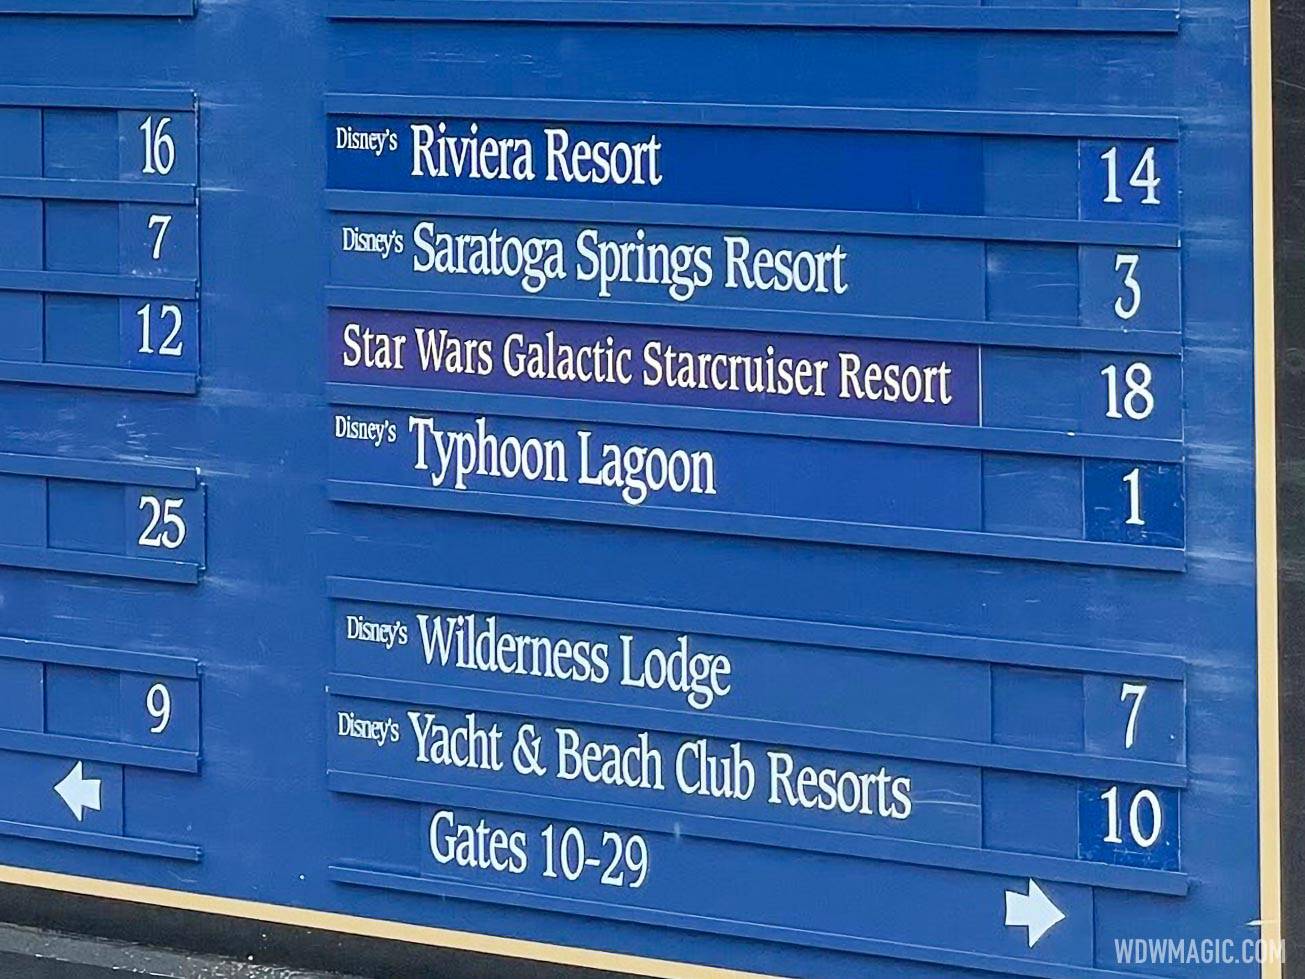 Star Wars Galactic Starcruiser joins the Bus Directory at Disney Springs